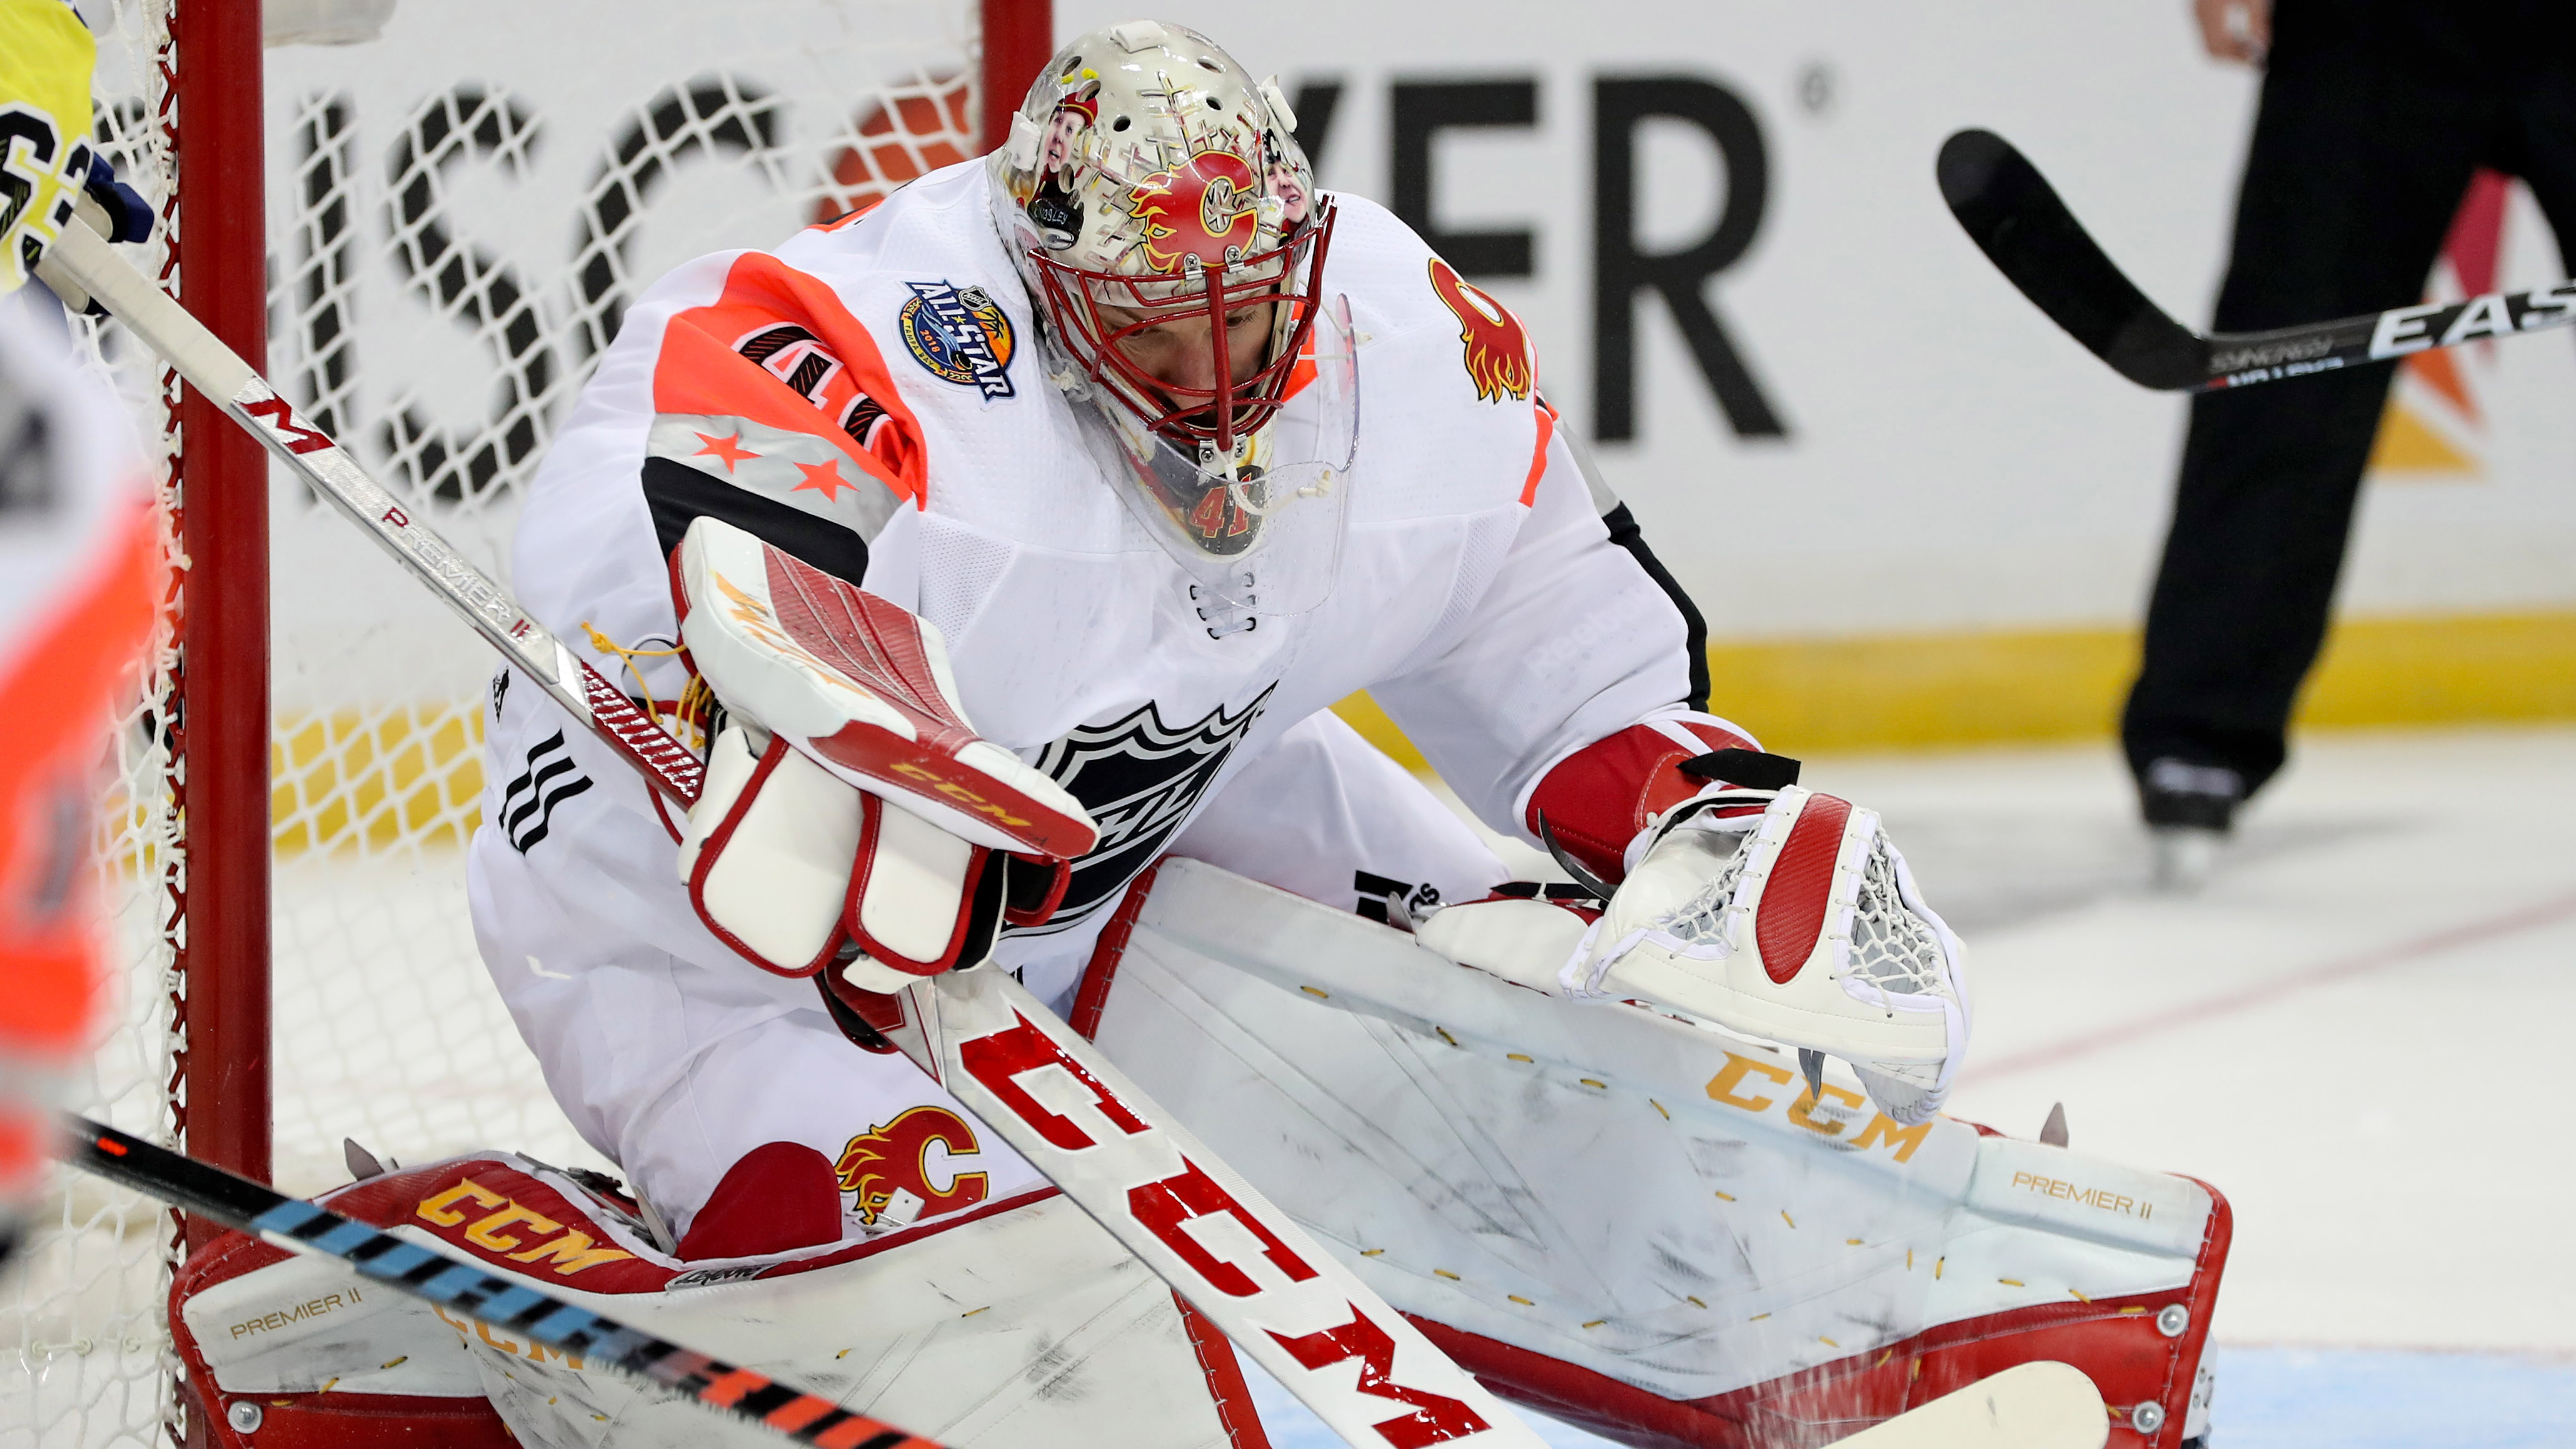 The NHL AllStar Game's perplexing number of goalies